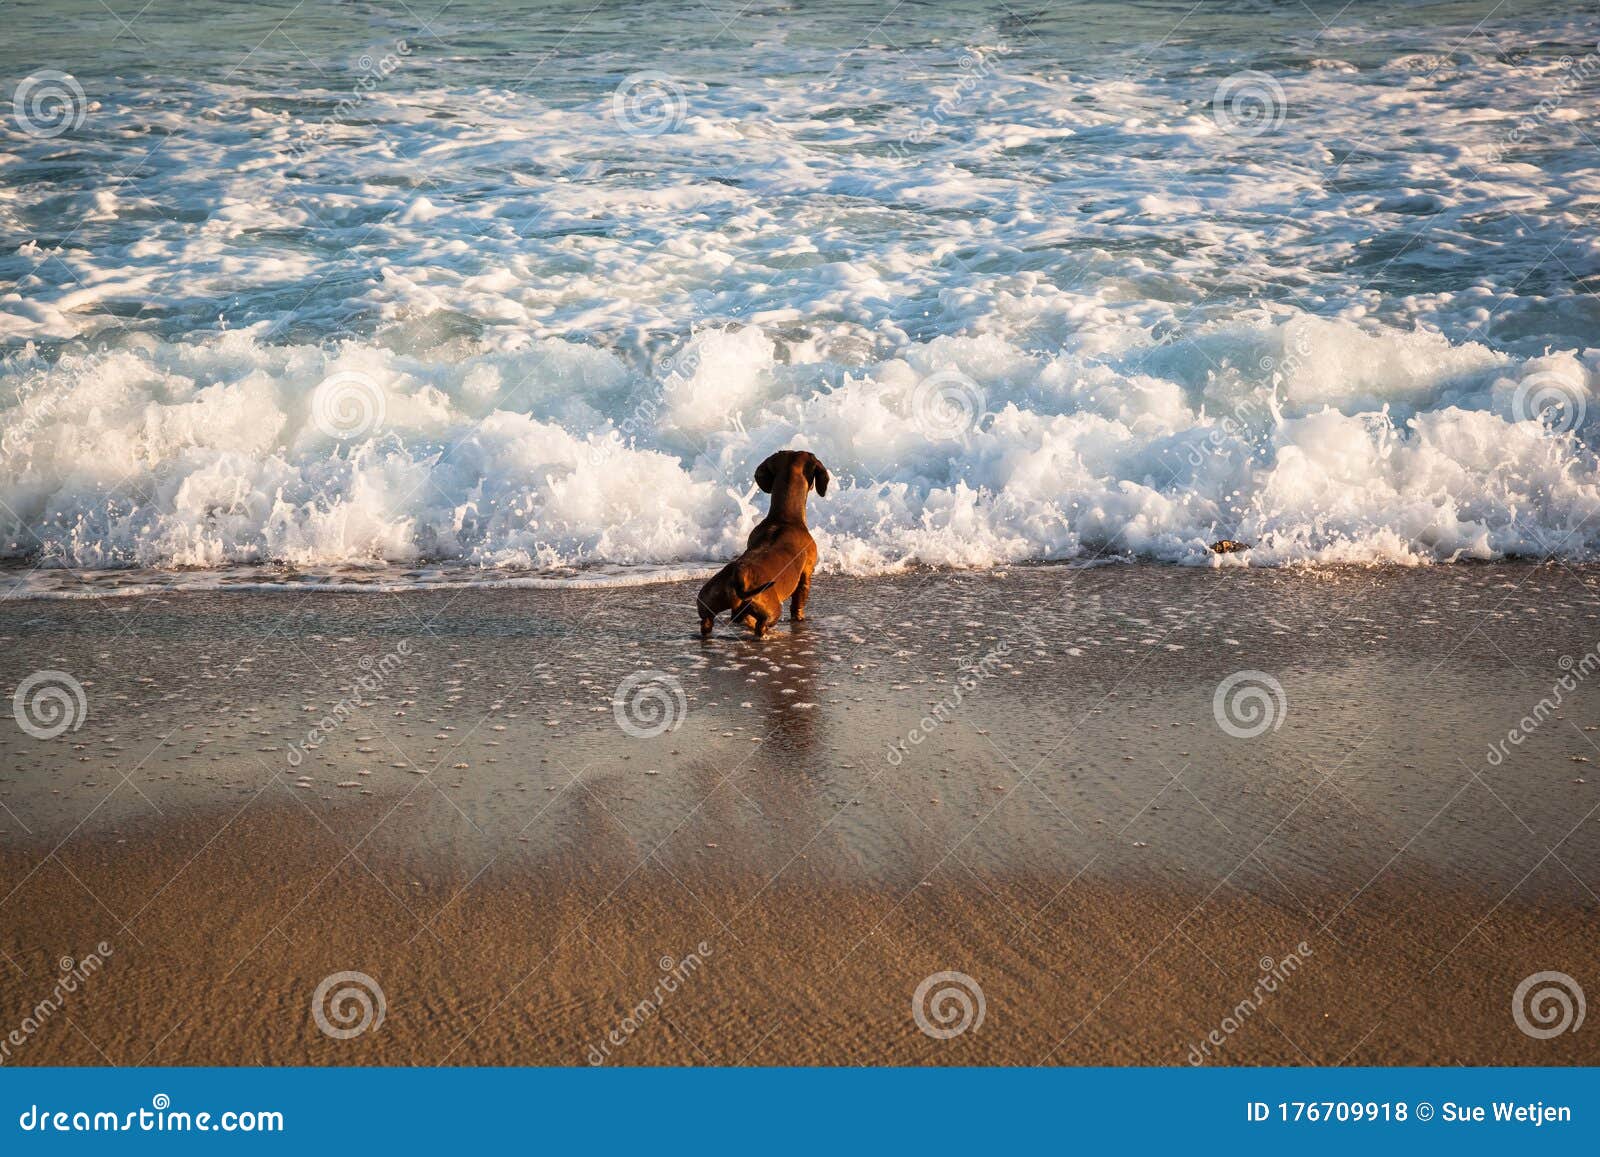 Dachshund Dog Playing with Breaking Waves on a Sunny Beach Stock Photo